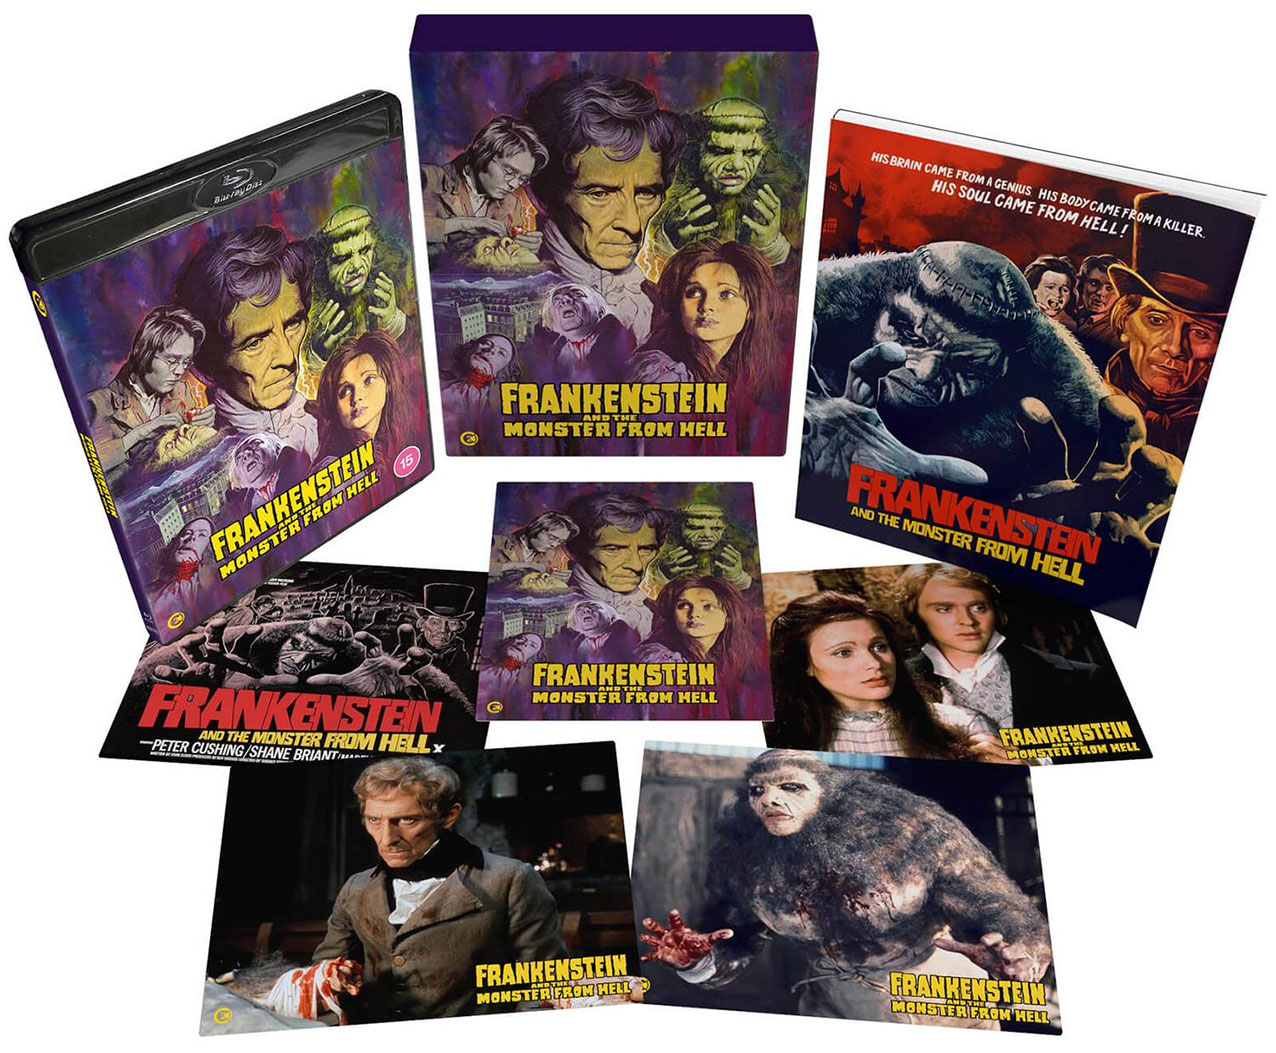 Frankenstein and the Monster From Hell Blu-ray pack shot